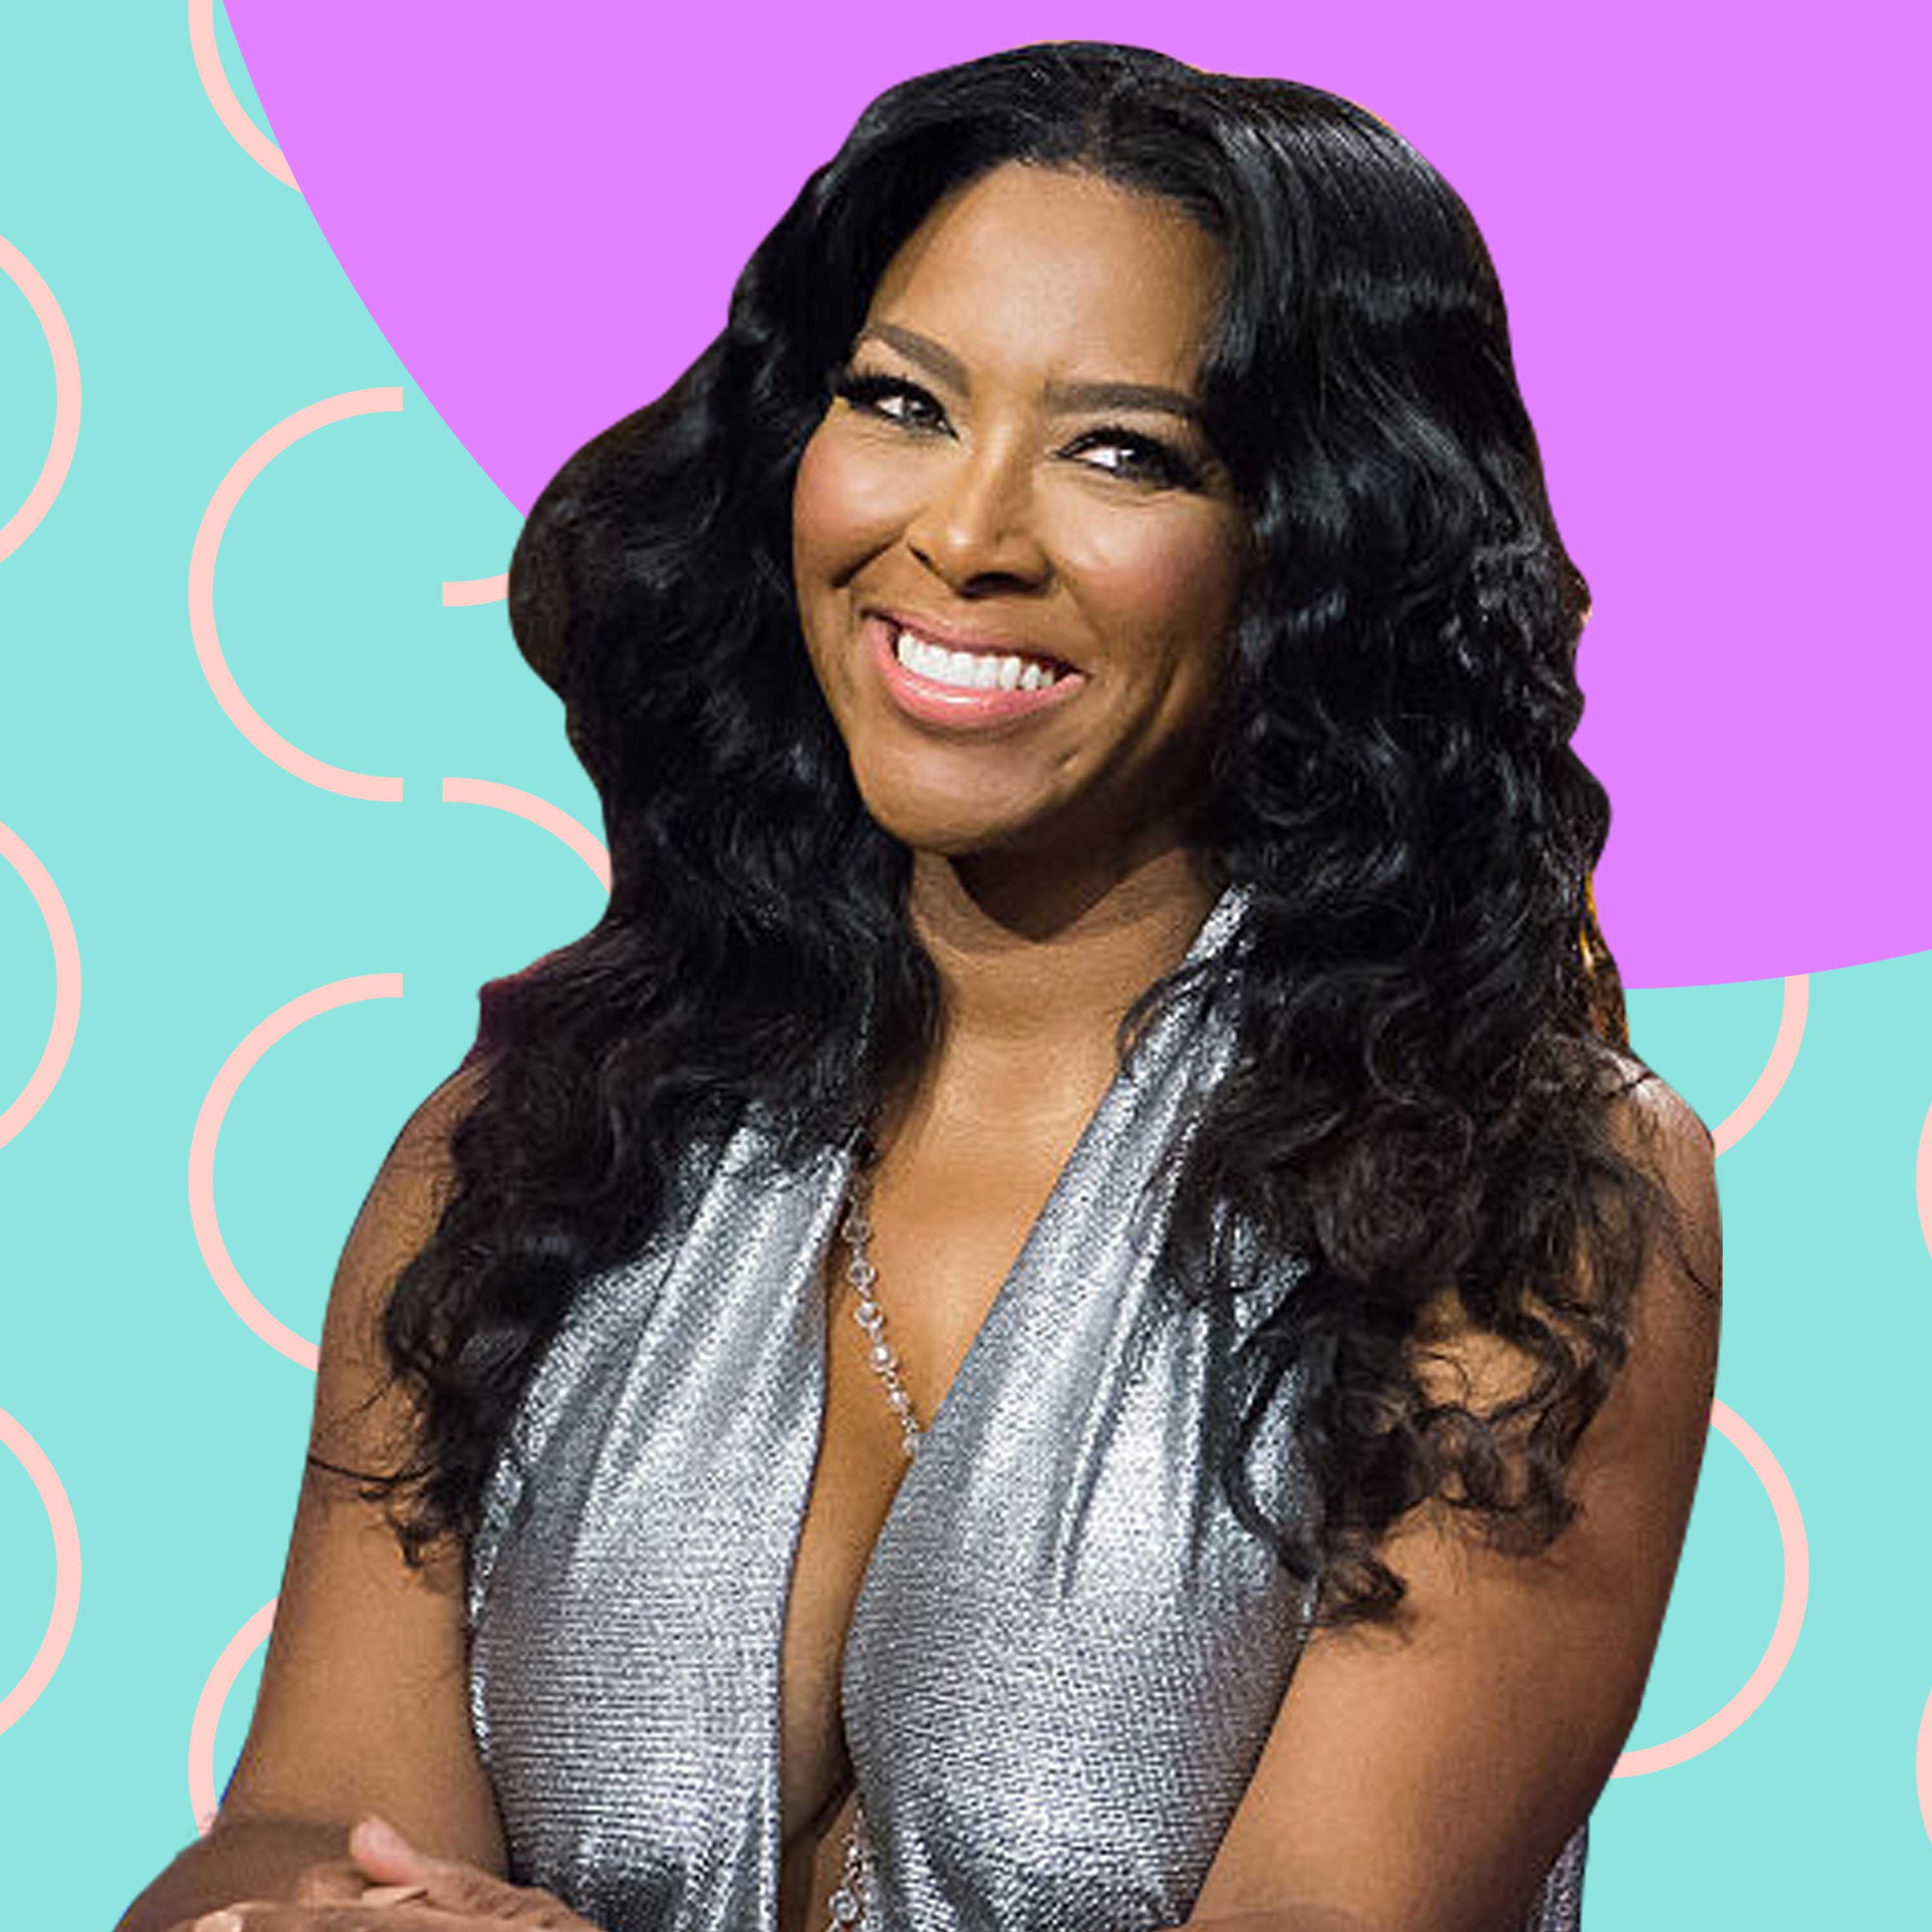 This Kenya Moore Instagram Post Has Us Wondering If She's Planning To Expand Her Family
